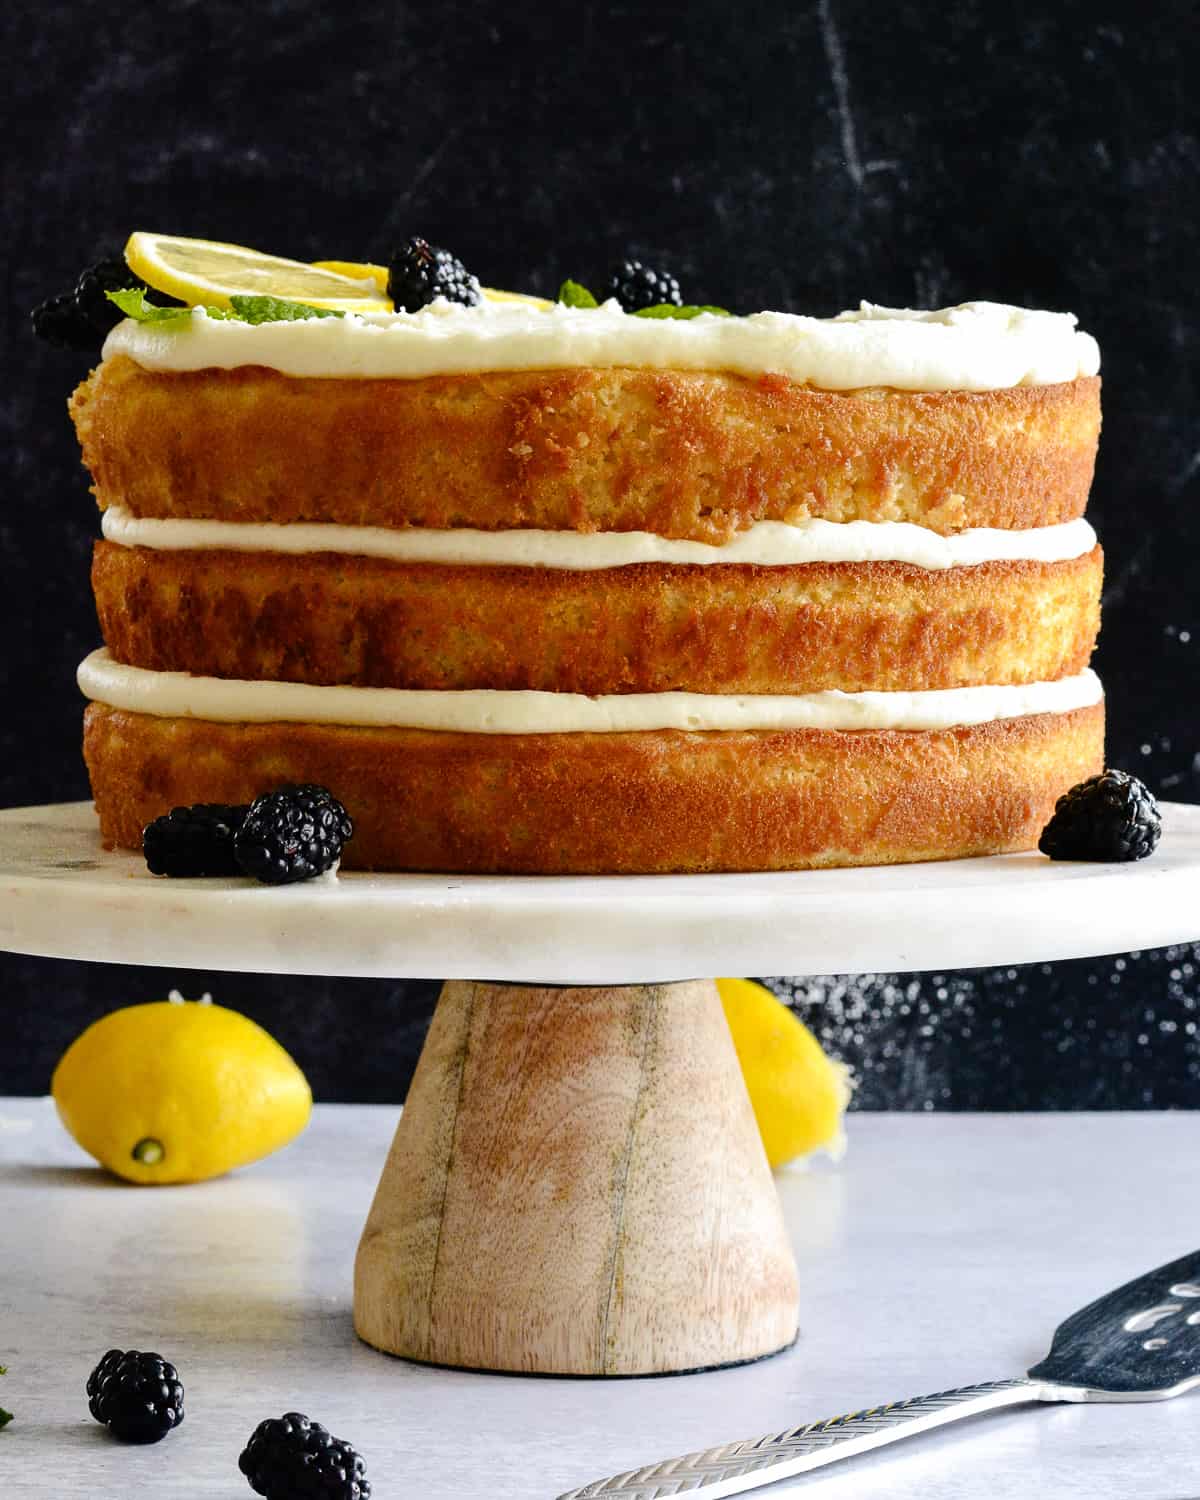 Side view of a 3 layer lemon cake on a cake plate.